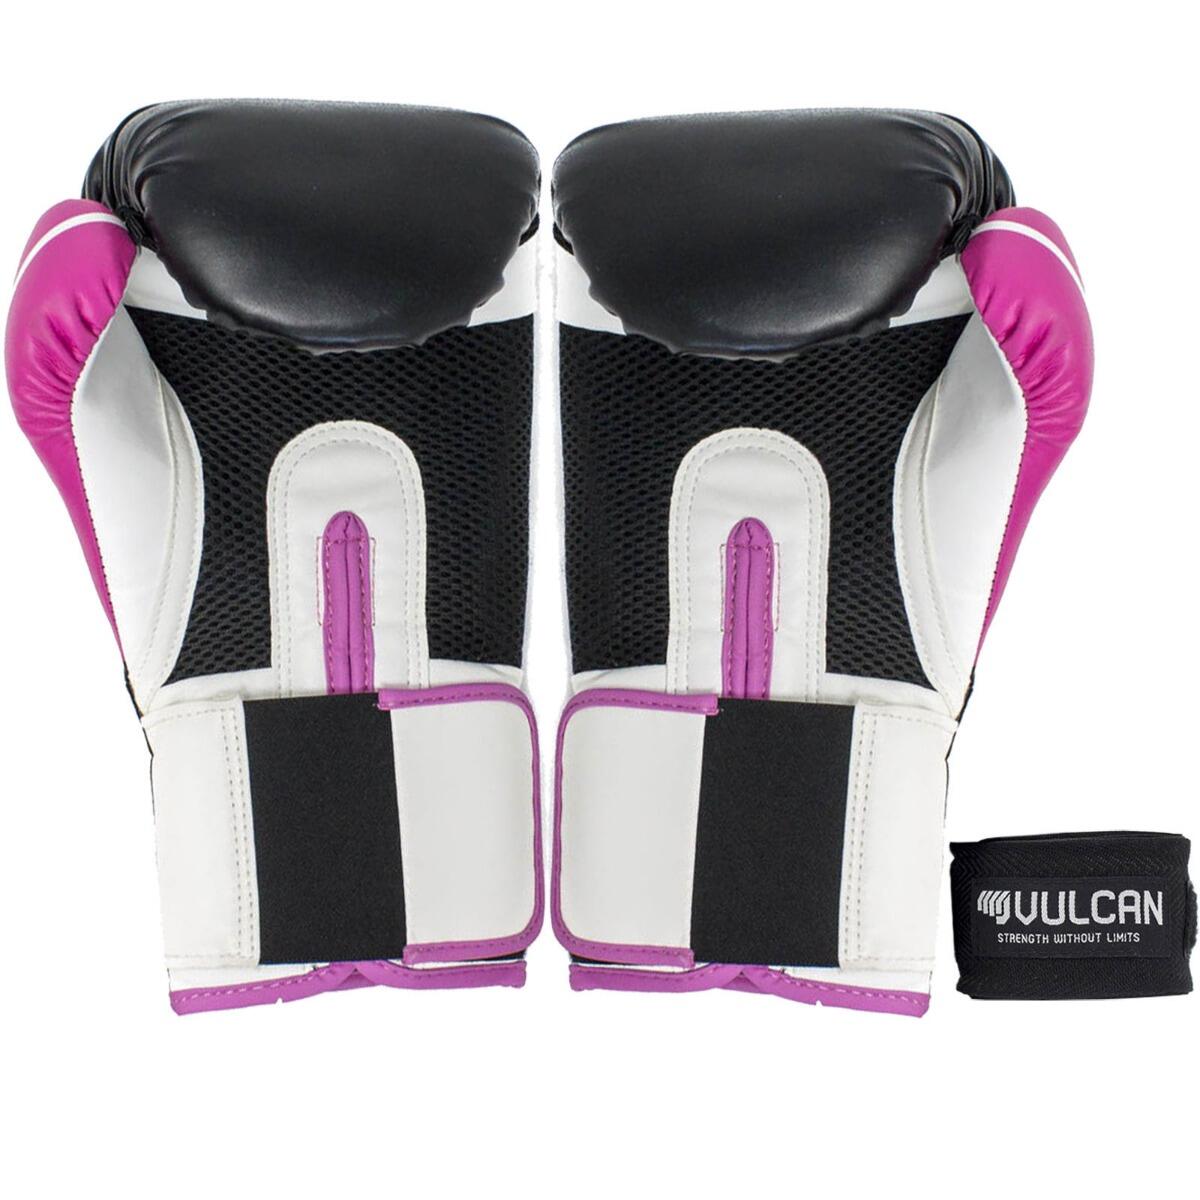 VULCAN BOXING GLOVES 14oz PINK/BLACK WITH HANDWRAPS 5/7